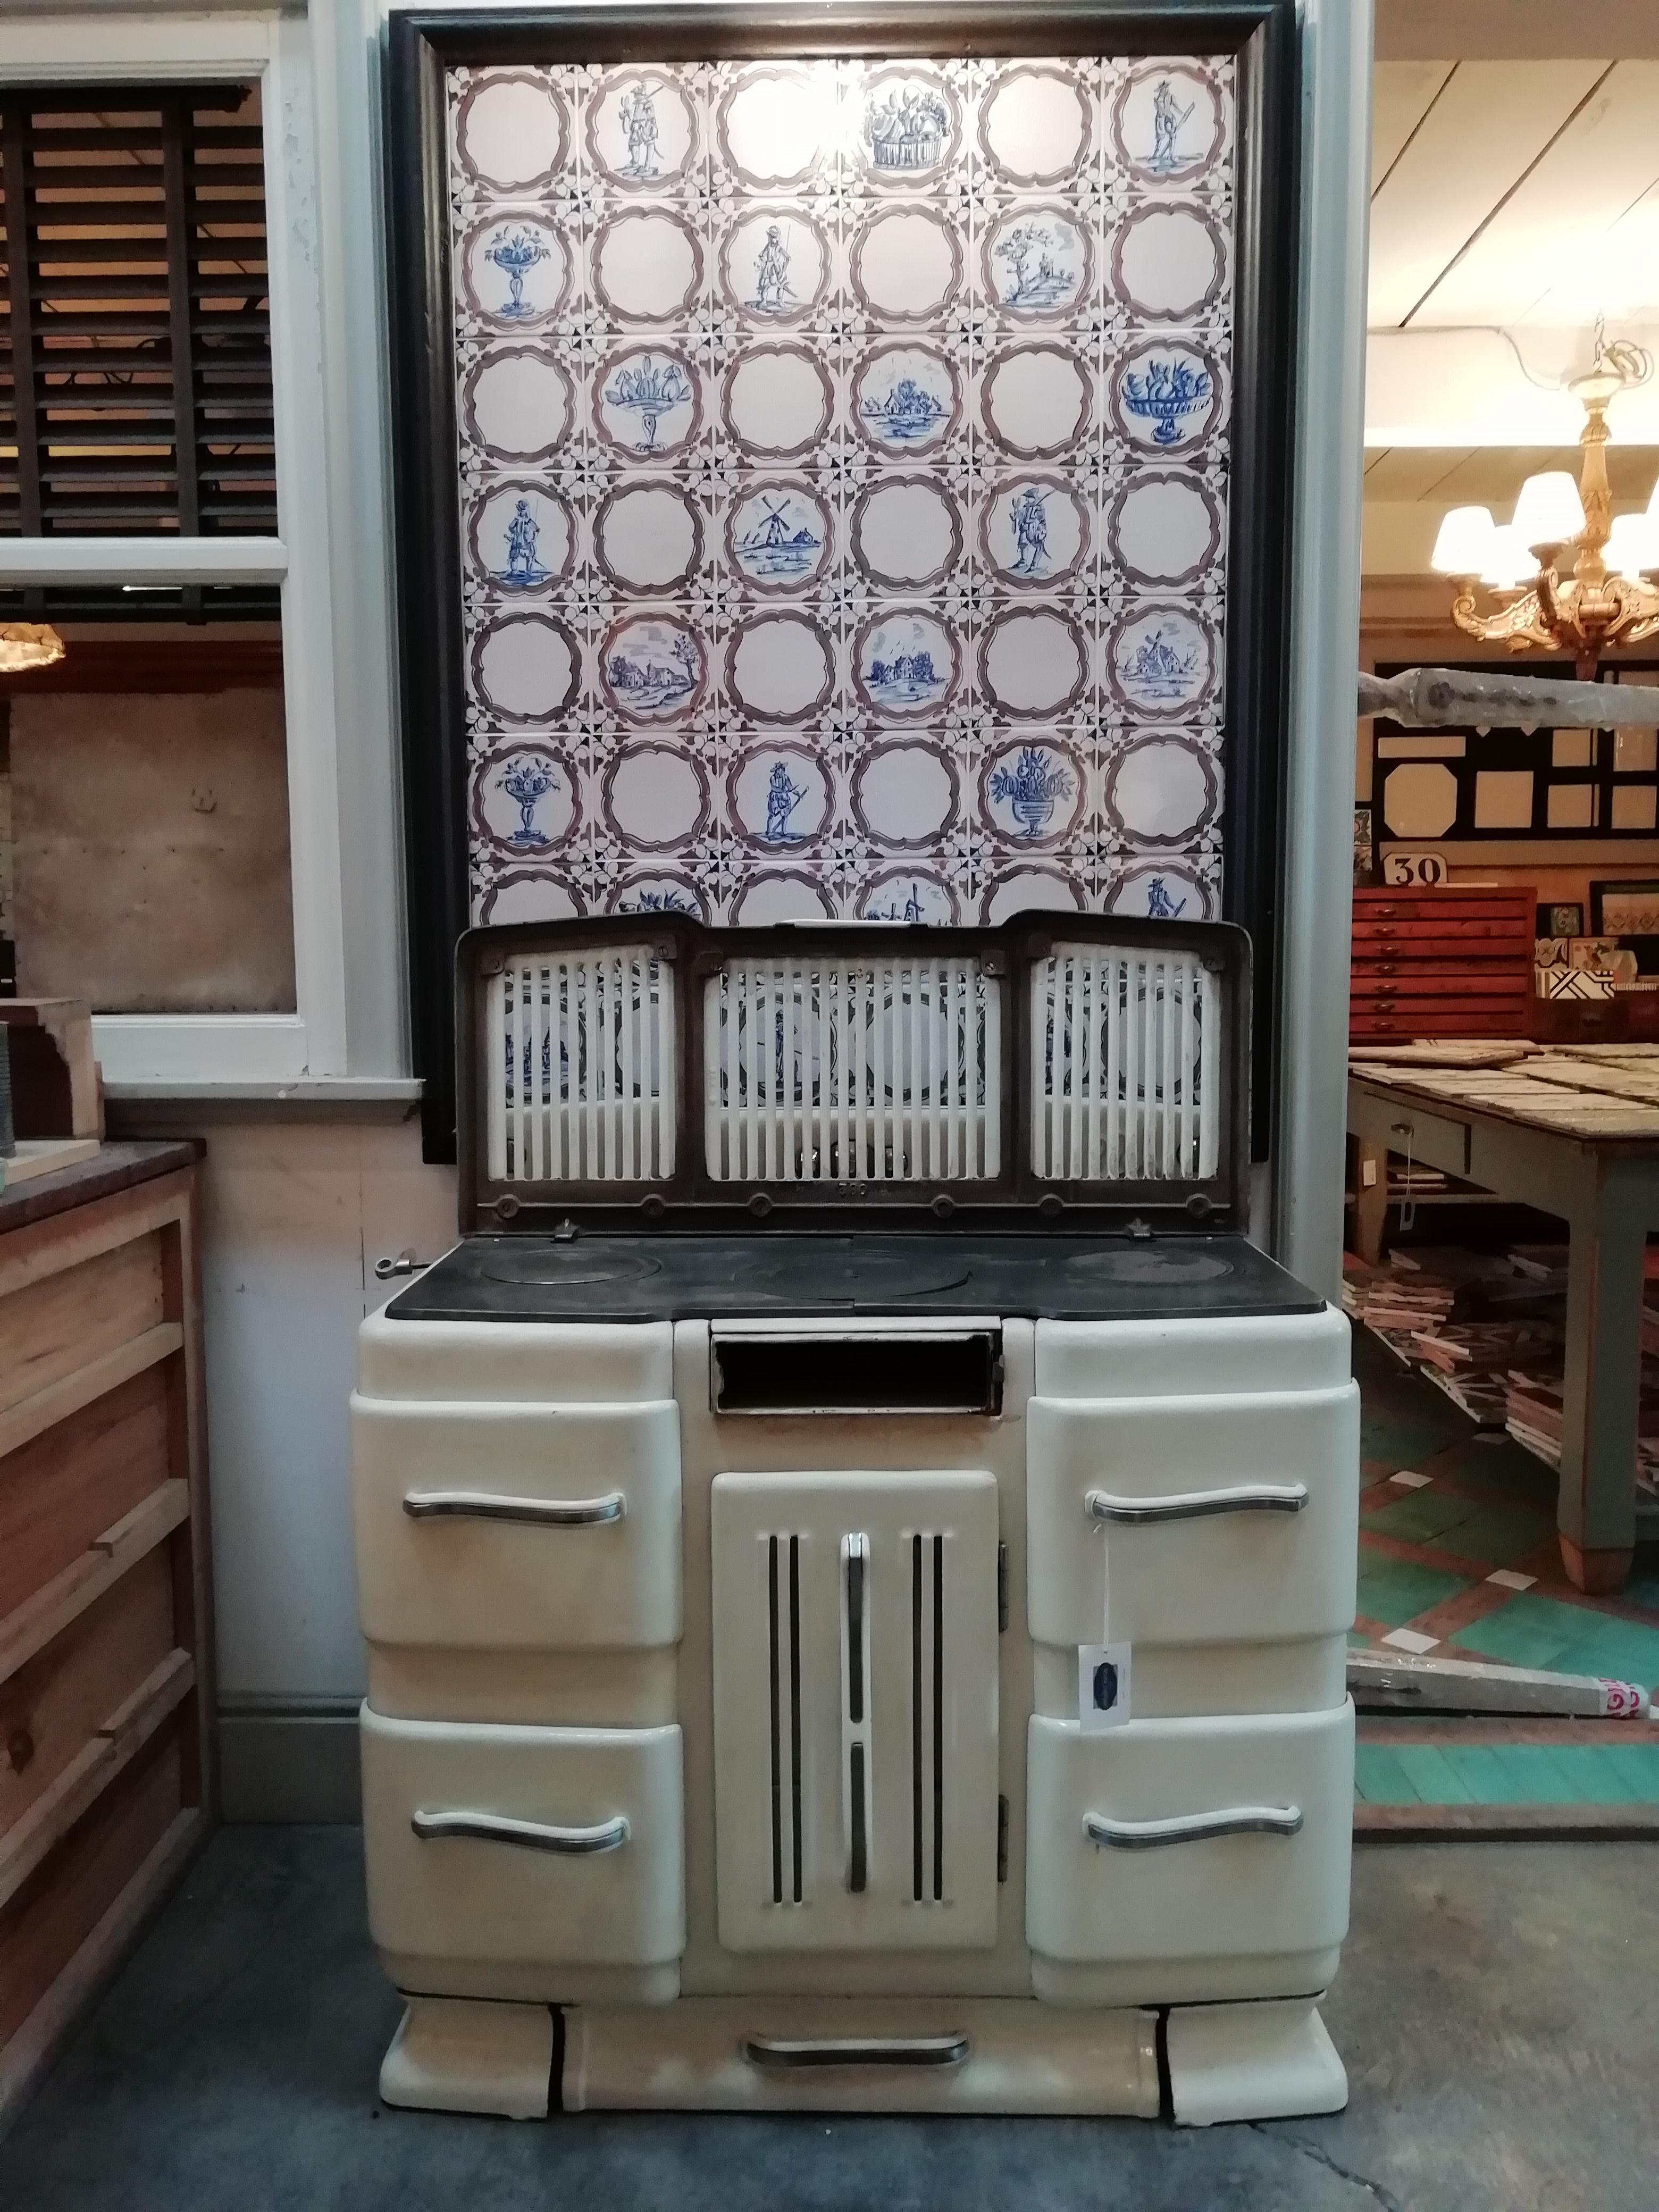 20th century Belgian stove by Efel, 1940s.